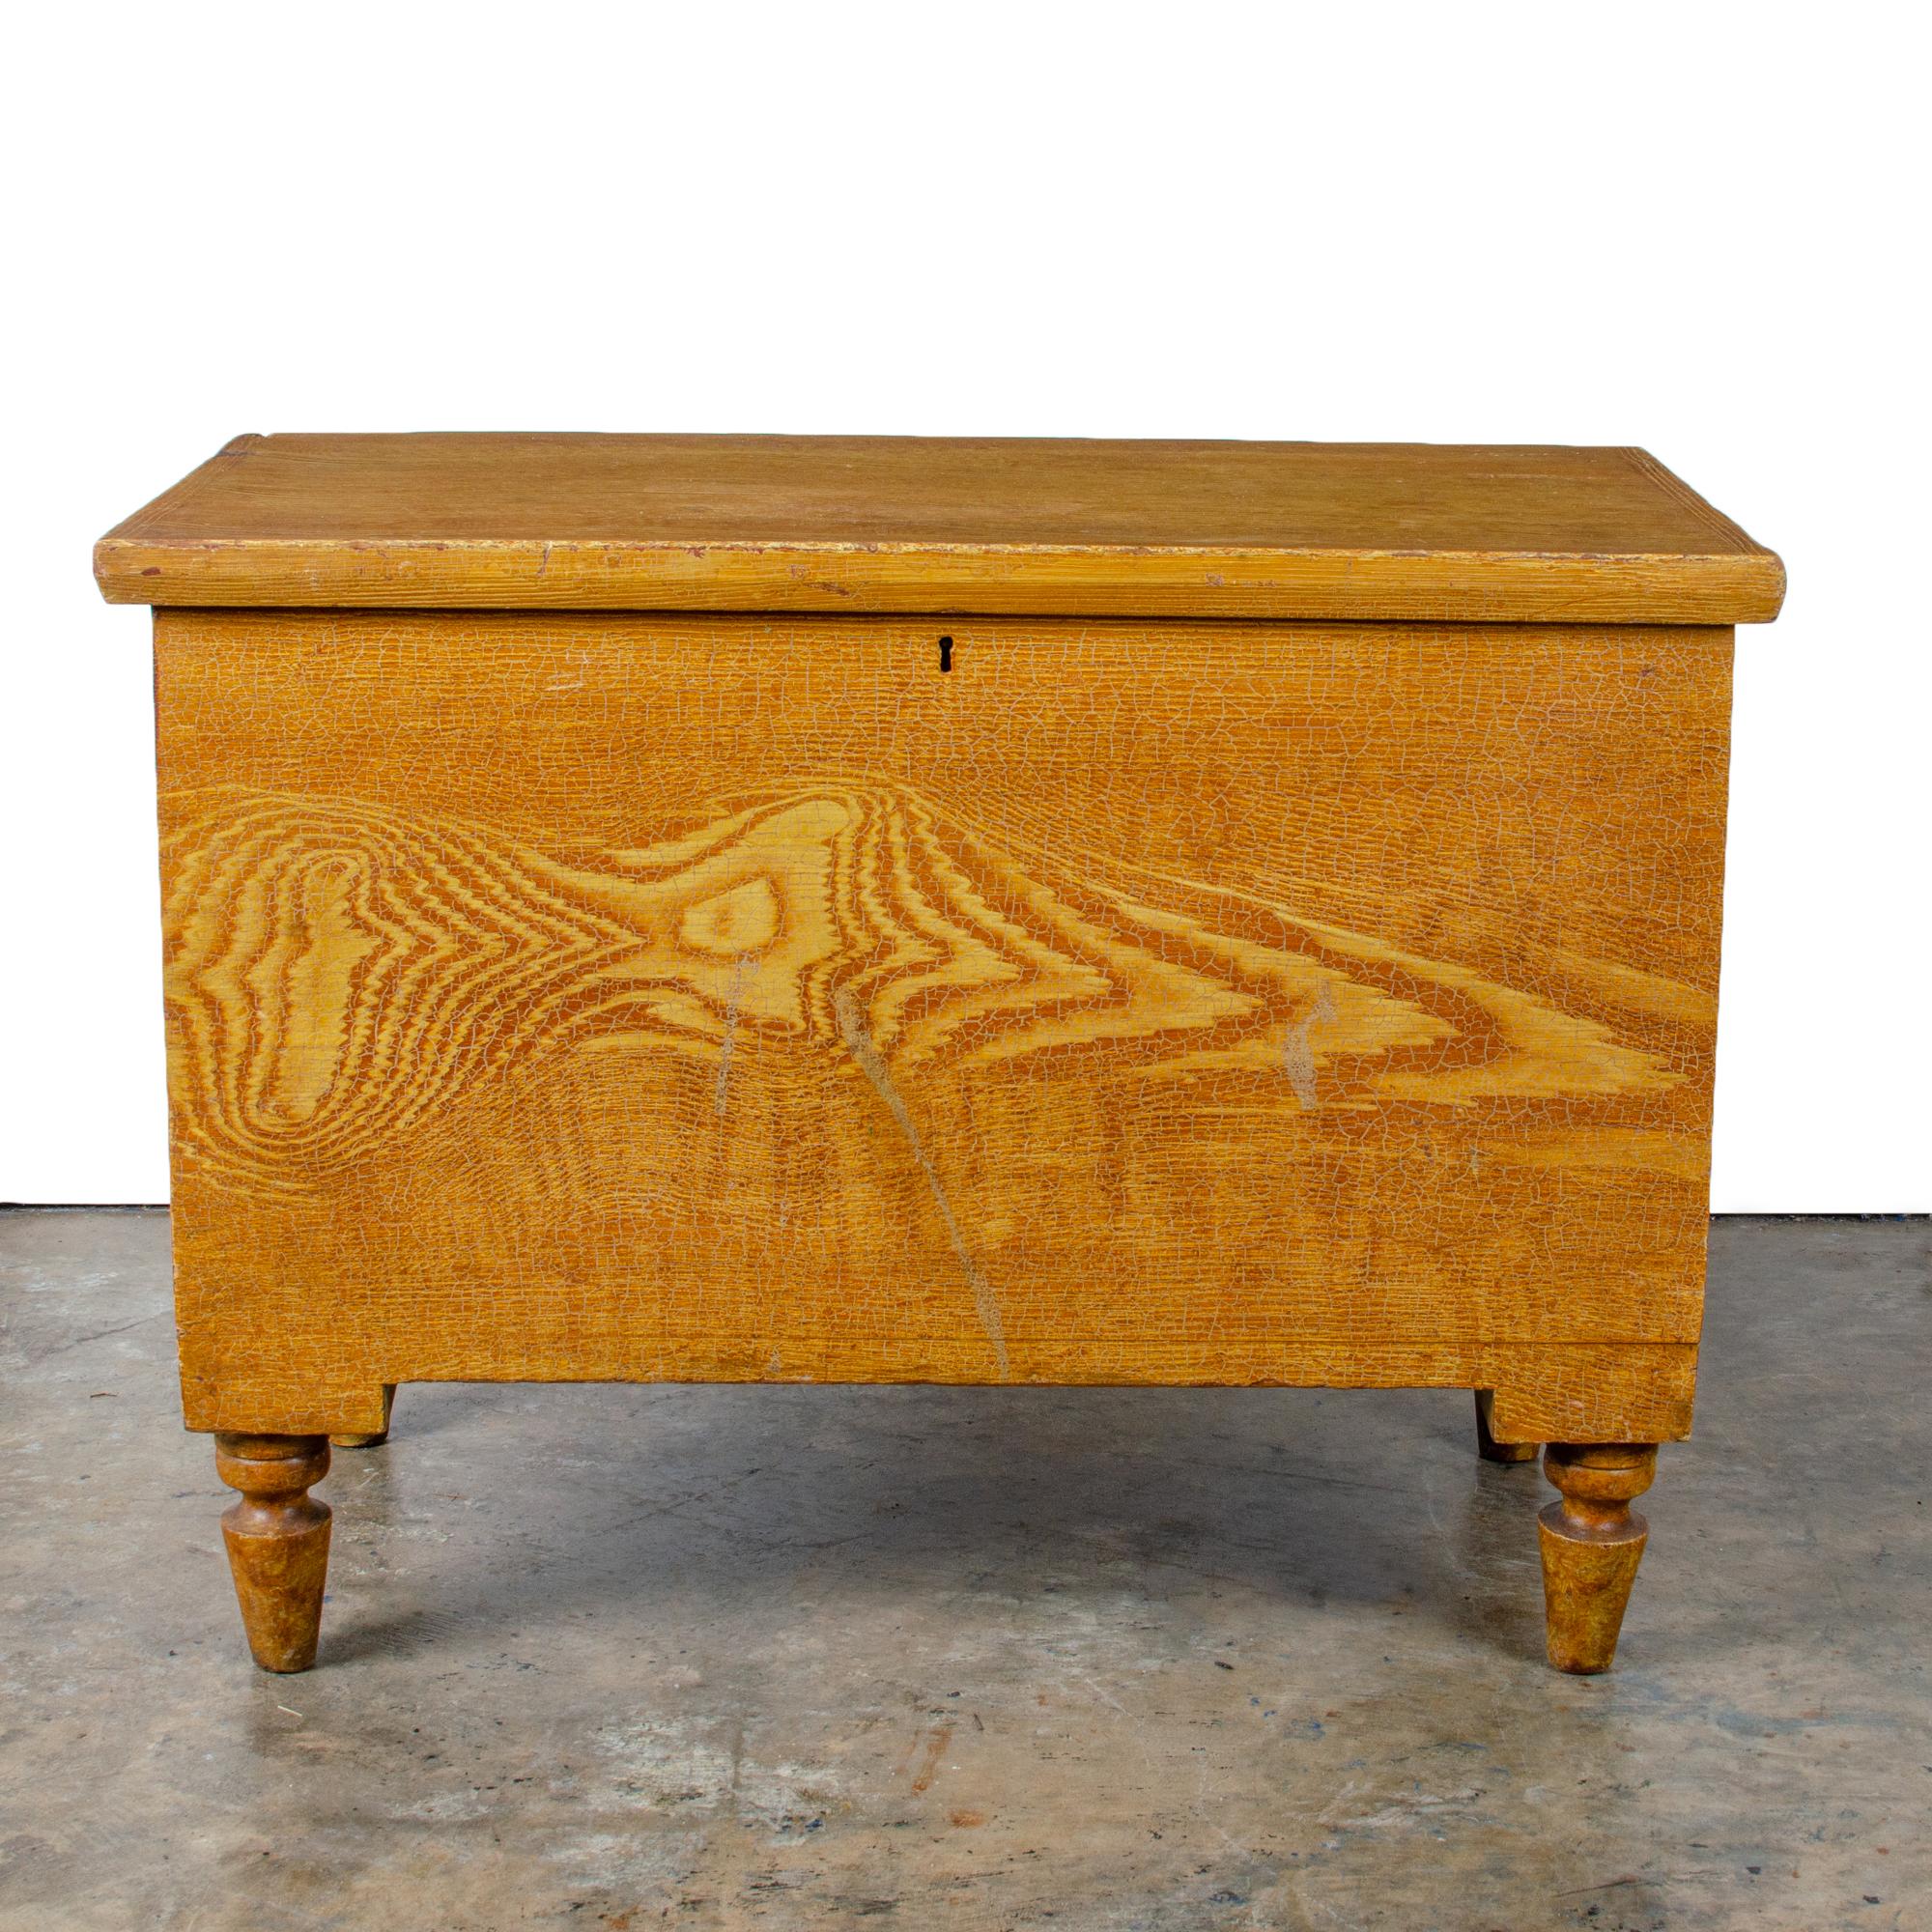 A grain painted blanket chest, Pennsylvania circa 1850.

31 ¾ inches wide by 17 ¾ inches deep by 23 ¼ inches tall

